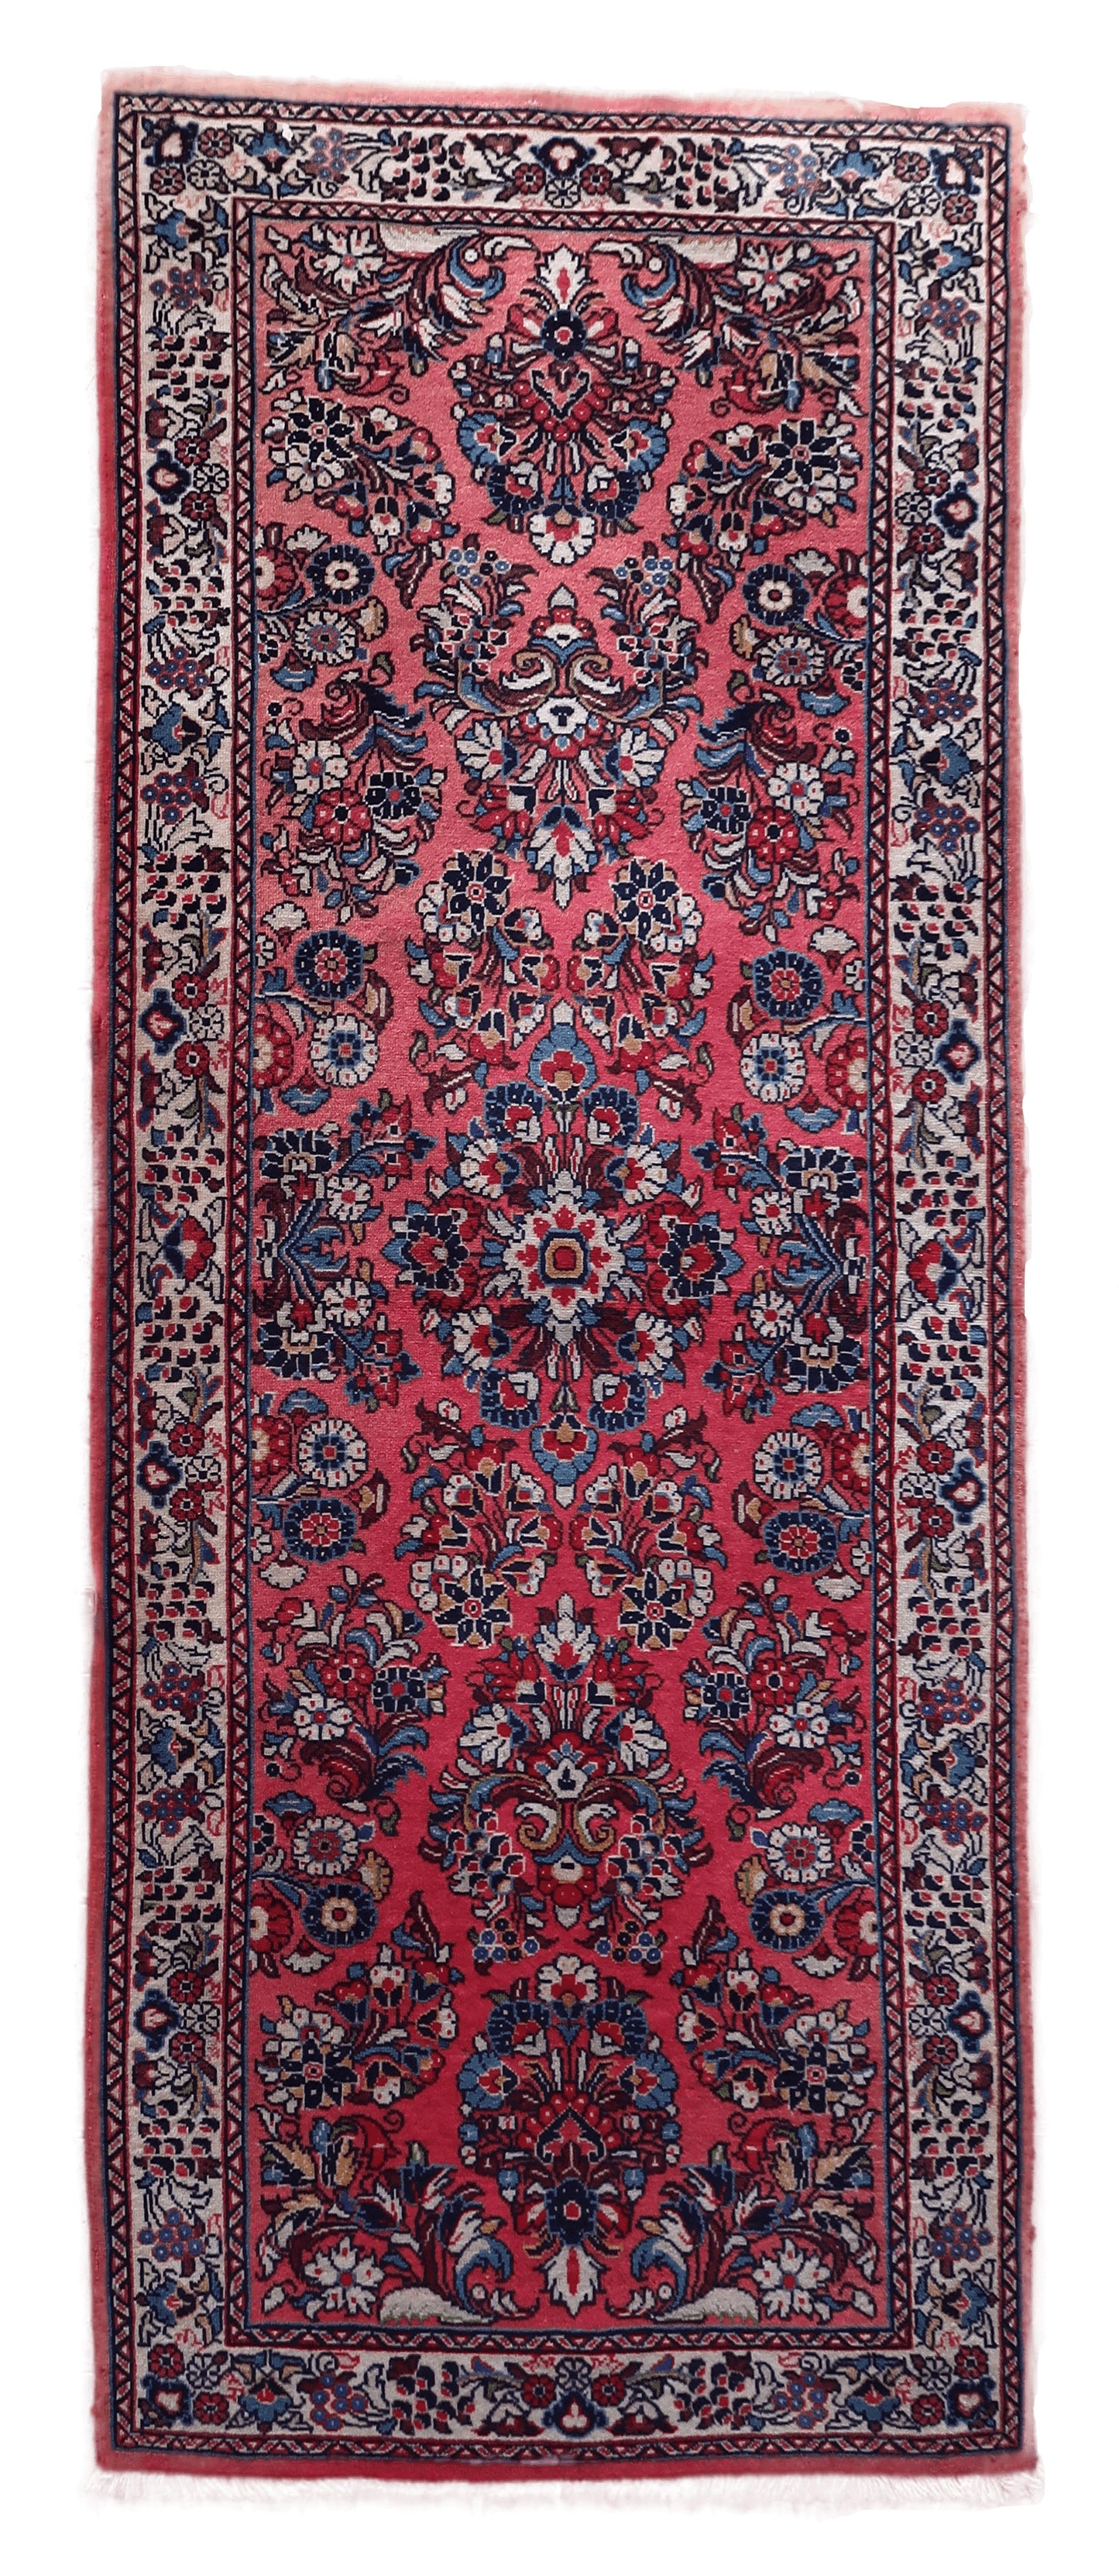 Vintage Persian Sarouk Runner - Faded Condition - 1960s